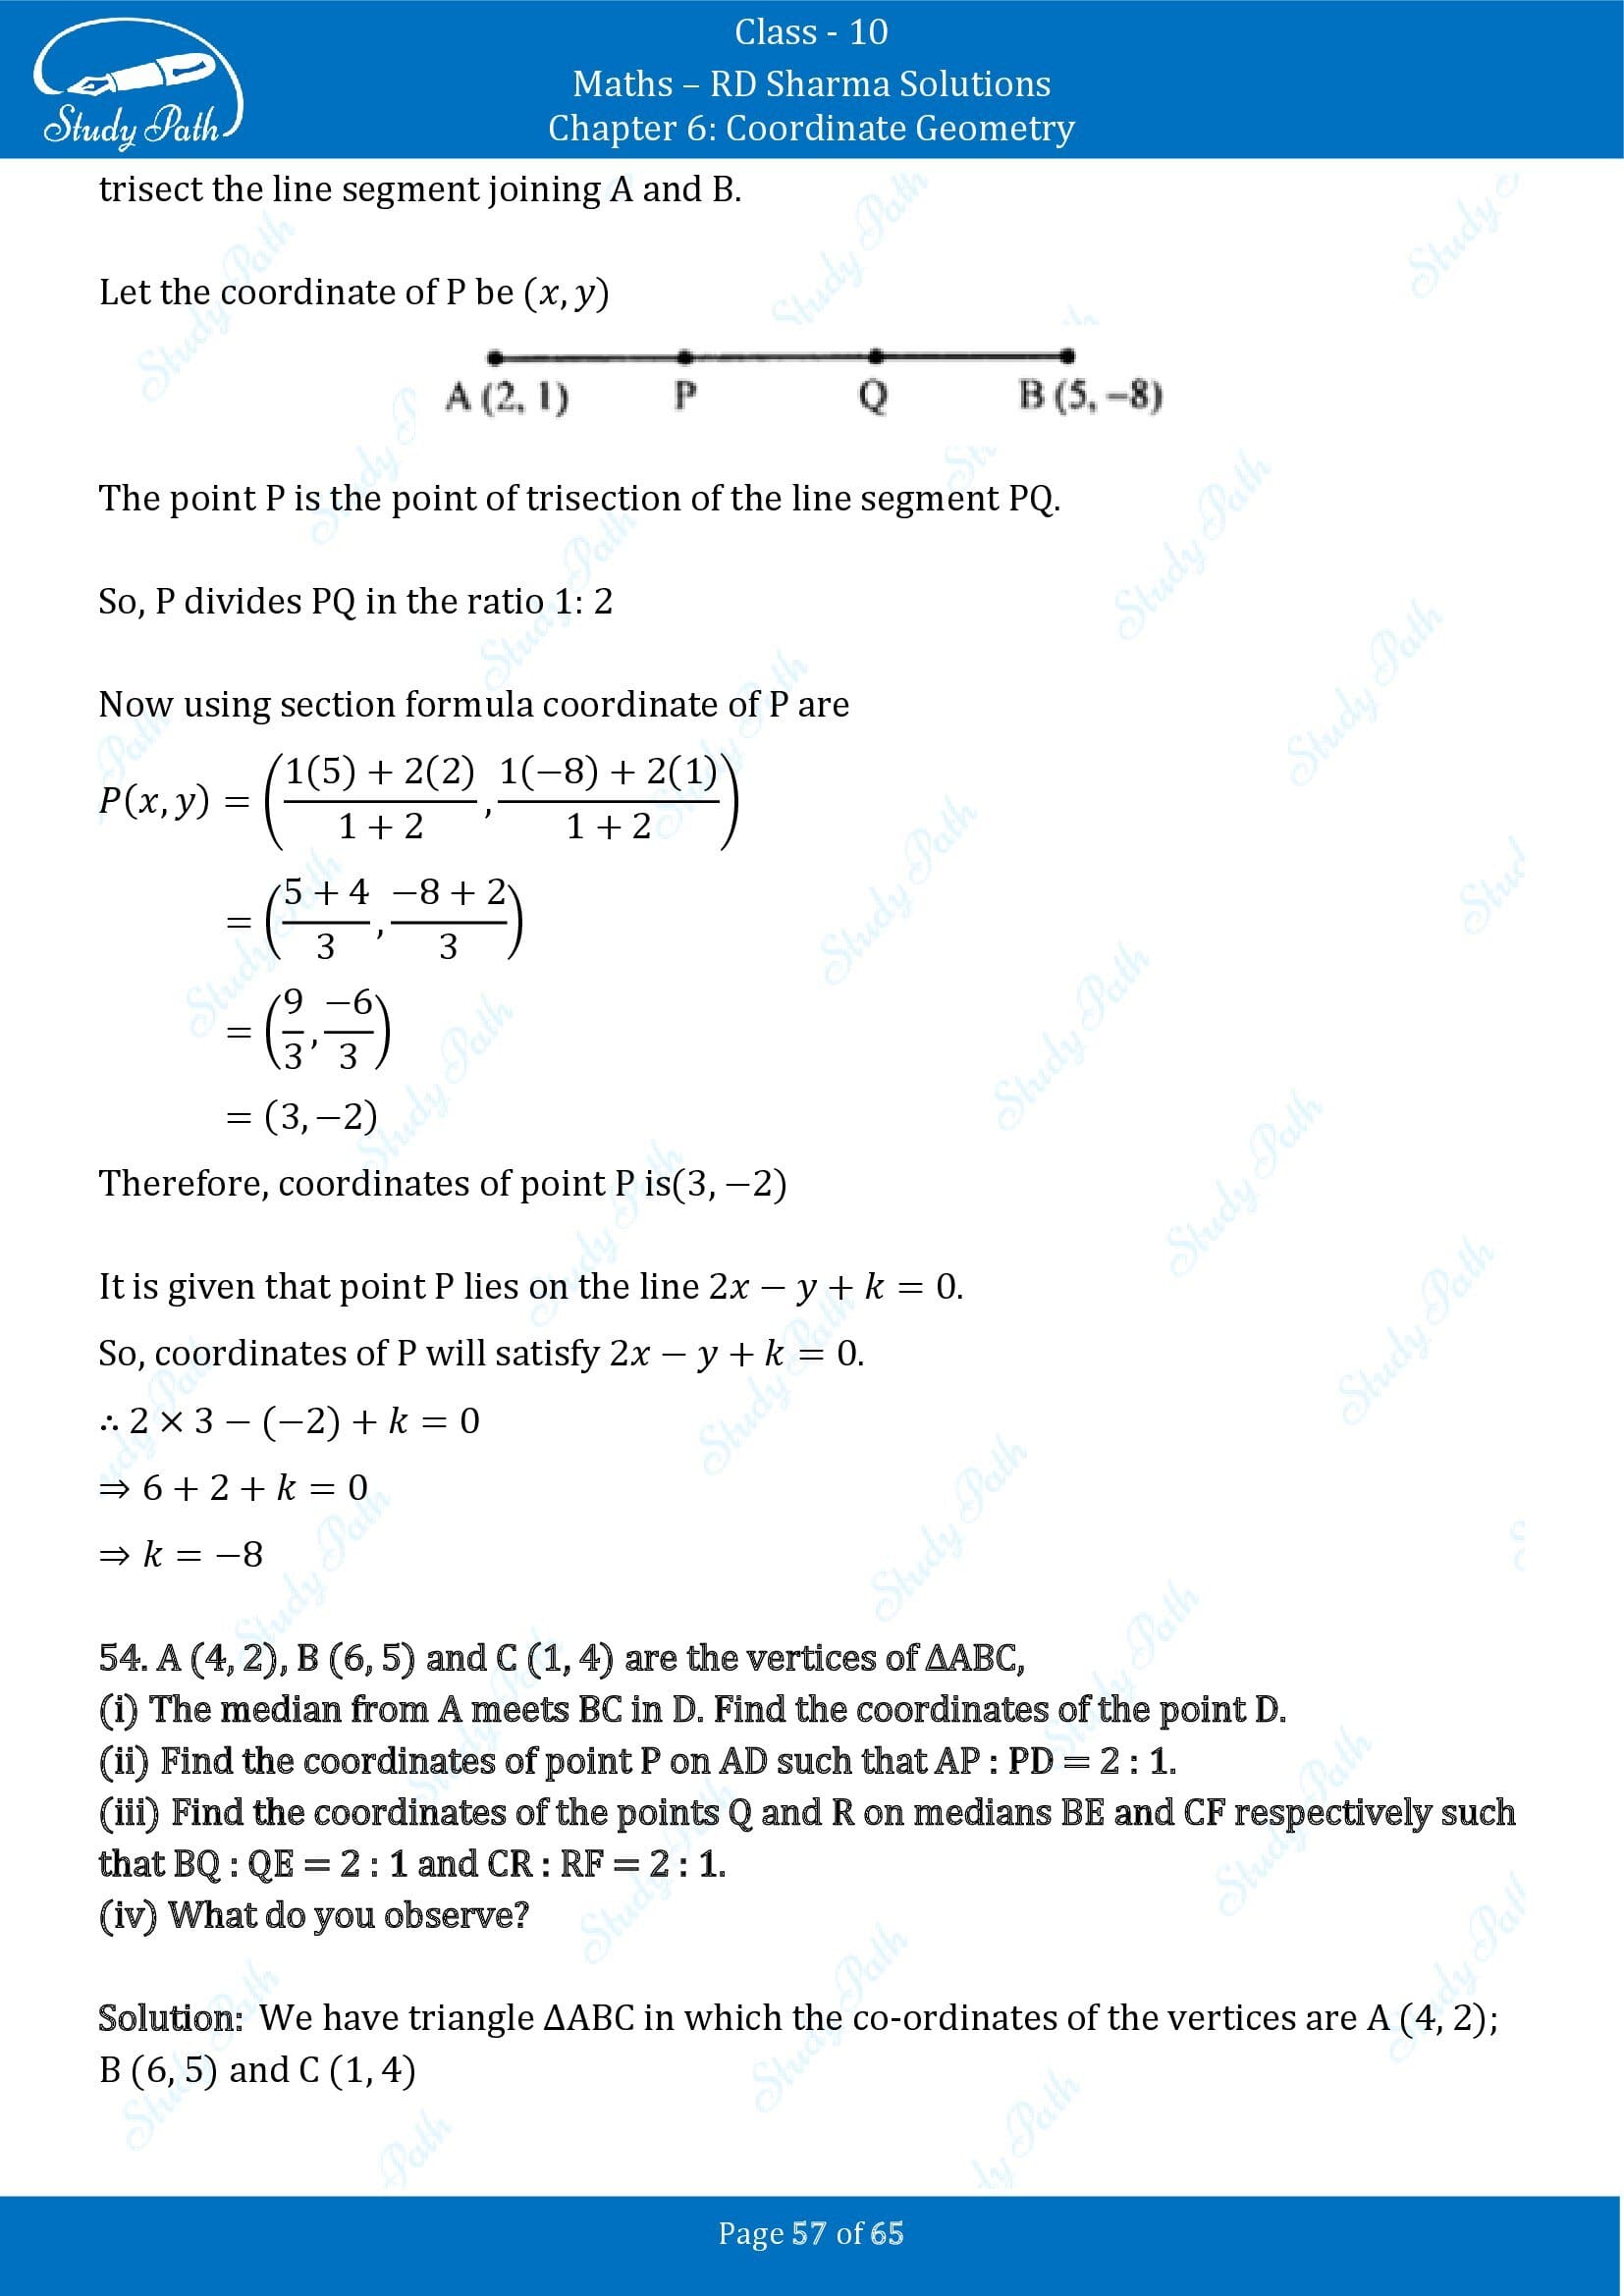 RD Sharma Solutions Class 10 Chapter 6 Coordinate Geometry Exercise 6.3 00057